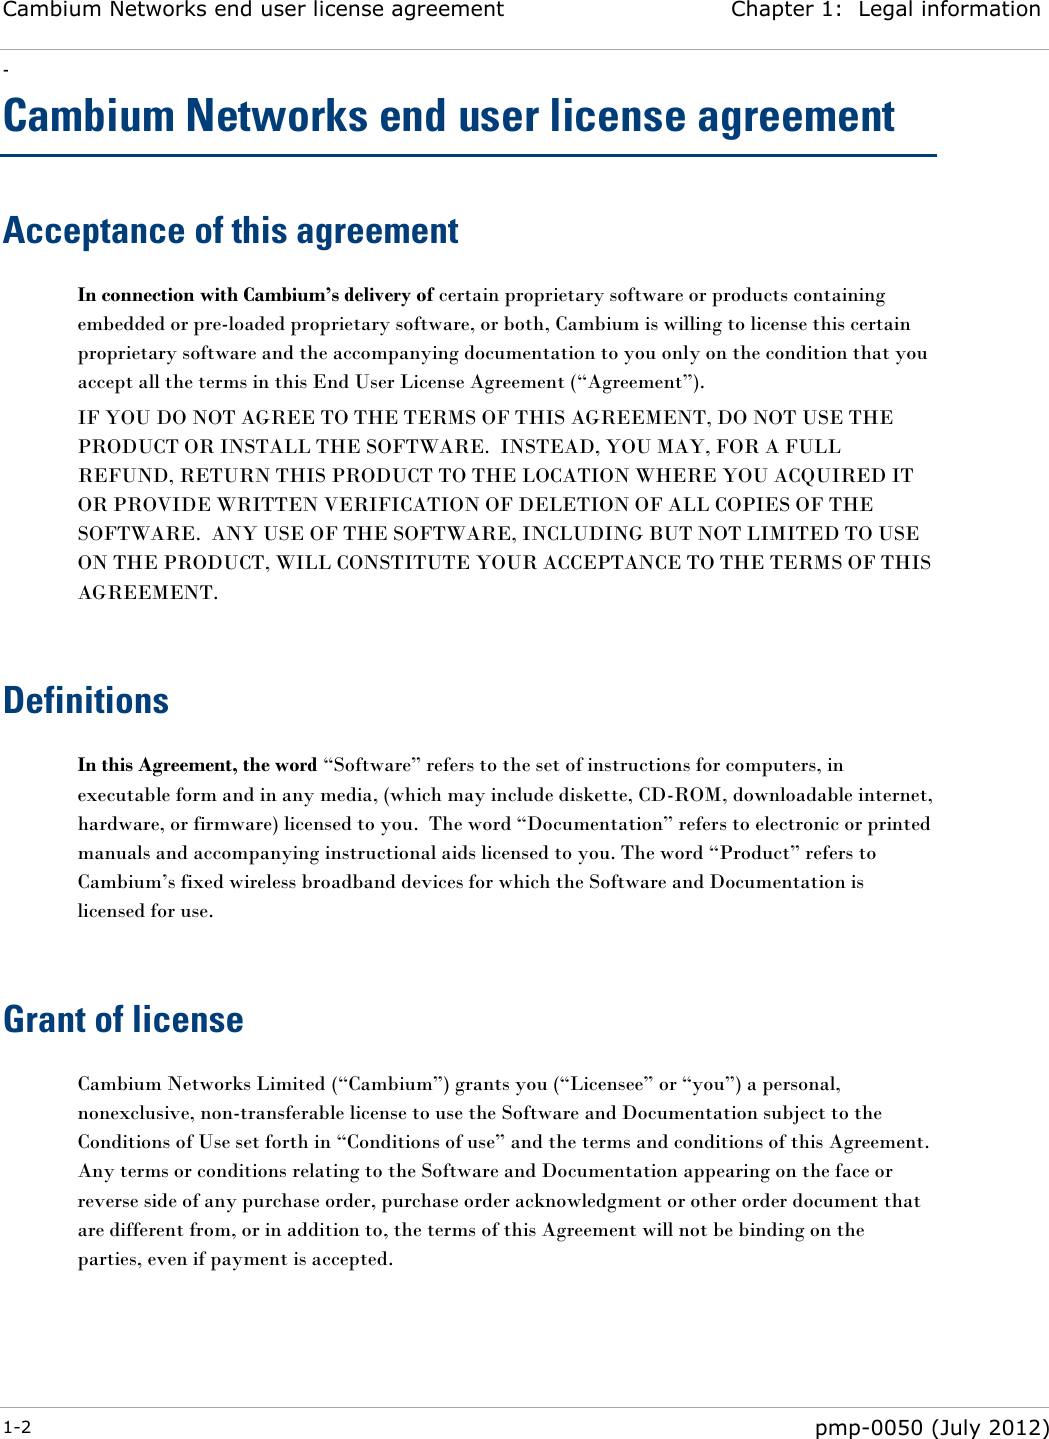 Cambium Networks end user license agreement Chapter 1:  Legal information - 1-2  pmp-0050 (July 2012)  Cambium Networks end user license agreement Acceptance of this agreement In connection with Cambium’s delivery of certain proprietary software or products containing embedded or pre-loaded proprietary software, or both, Cambium is willing to license this certain proprietary software and the accompanying documentation to you only on the condition that you accept all the terms in this End User License Agreement (―Agreement‖). IF YOU DO NOT AGREE TO THE TERMS OF THIS AGREEMENT, DO NOT USE THE PRODUCT OR INSTALL THE SOFTWARE.  INSTEAD, YOU MAY, FOR A FULL REFUND, RETURN THIS PRODUCT TO THE LOCATION WHERE YOU ACQUIRED IT OR PROVIDE WRITTEN VERIFICATION OF DELETION OF ALL COPIES OF THE SOFTWARE.  ANY USE OF THE SOFTWARE, INCLUDING BUT NOT LIMITED TO USE ON THE PRODUCT, WILL CONSTITUTE YOUR ACCEPTANCE TO THE TERMS OF THIS AGREEMENT.   Definitions In this Agreement, the word ―Software‖ refers to the set of instructions for computers, in executable form and in any media, (which may include diskette, CD-ROM, downloadable internet, hardware, or firmware) licensed to you.  The word ―Documentation‖ refers to electronic or printed manuals and accompanying instructional aids licensed to you. The word ―Product‖ refers to Cambium‘s fixed wireless broadband devices for which the Software and Documentation is licensed for use.   Grant of license Cambium Networks Limited (―Cambium‖) grants you (―Licensee‖ or ―you‖) a personal, nonexclusive, non-transferable license to use the Software and Documentation subject to the Conditions of Use set forth in ―Conditions of use‖ and the terms and conditions of this Agreement.  Any terms or conditions relating to the Software and Documentation appearing on the face or reverse side of any purchase order, purchase order acknowledgment or other order document that are different from, or in addition to, the terms of this Agreement will not be binding on the parties, even if payment is accepted.   